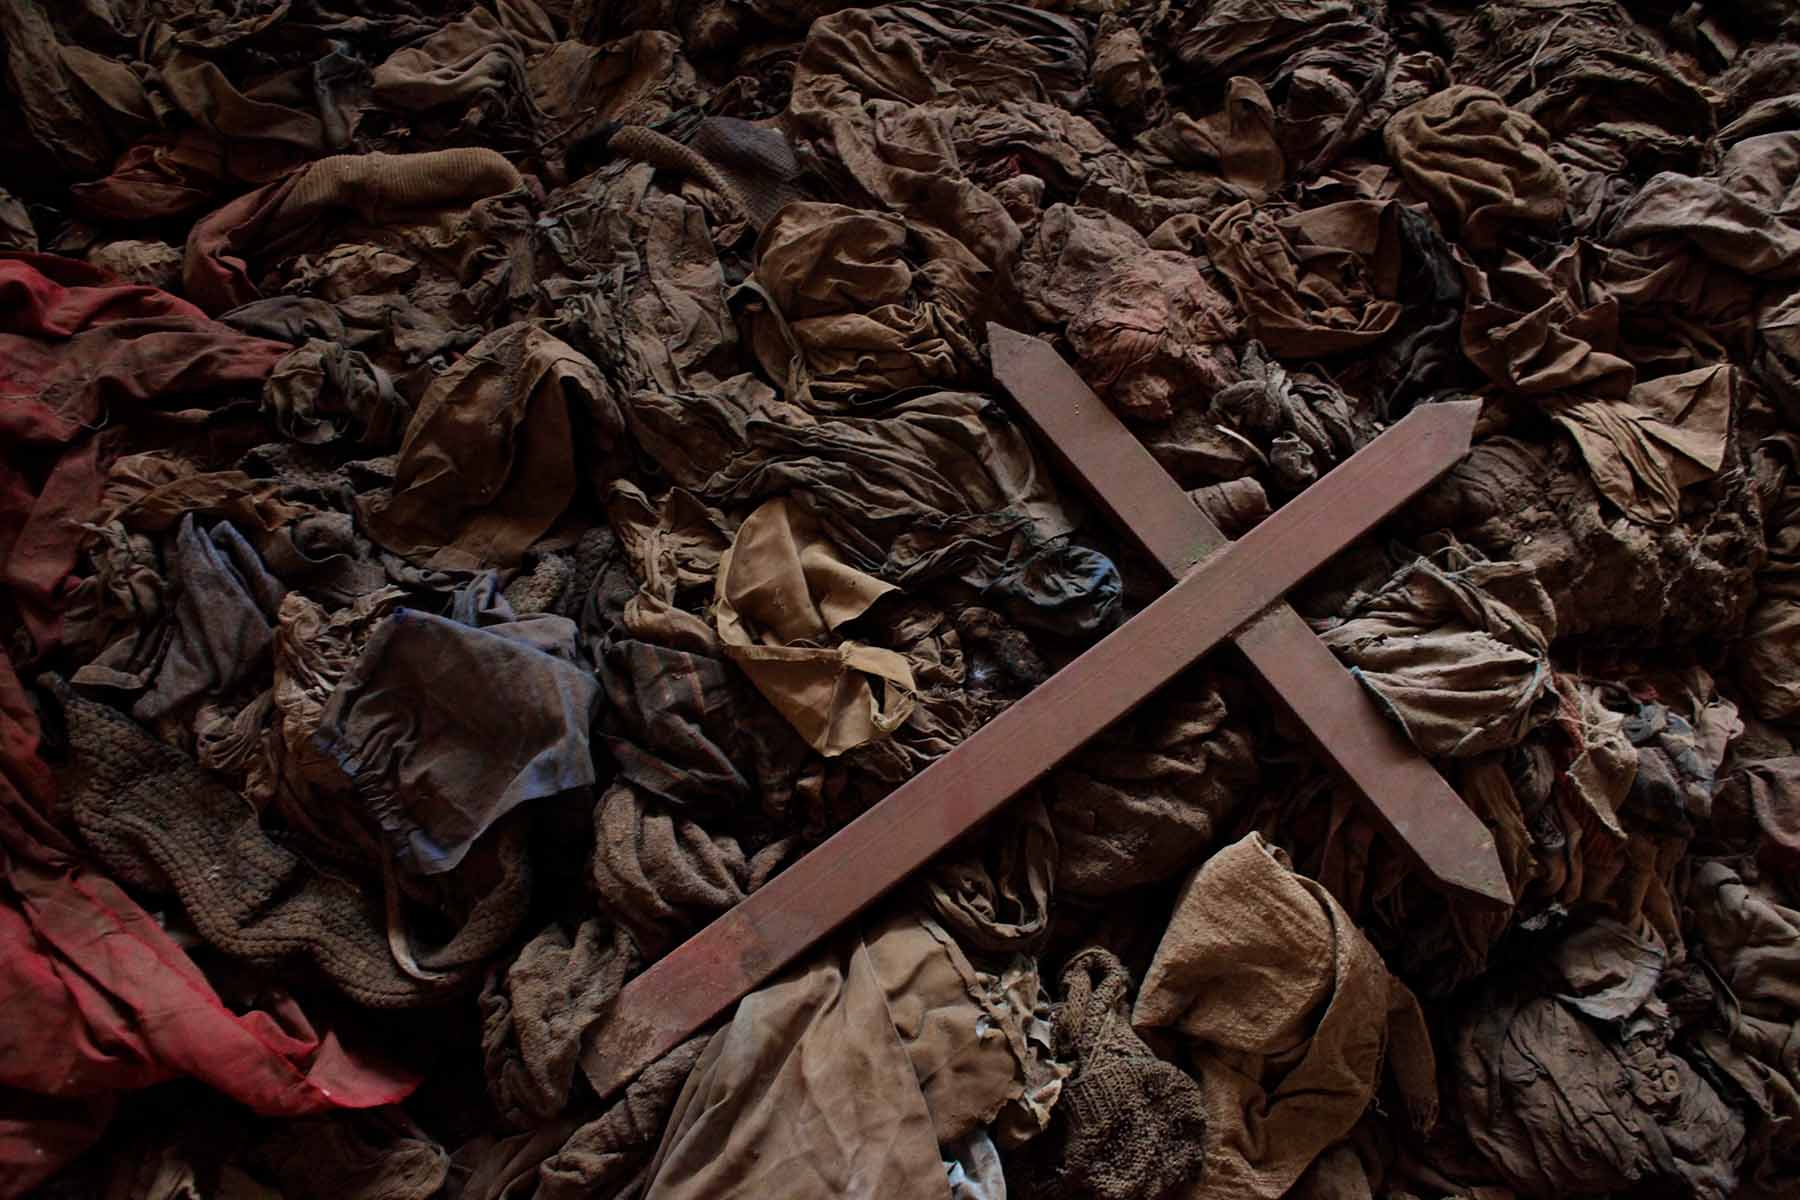 A wooden cross lies among clothes from some of the estimated 10,000 Tutsis killed in a two-day massacre at Nyamata church, now a memorial to the Rwandan genocide.